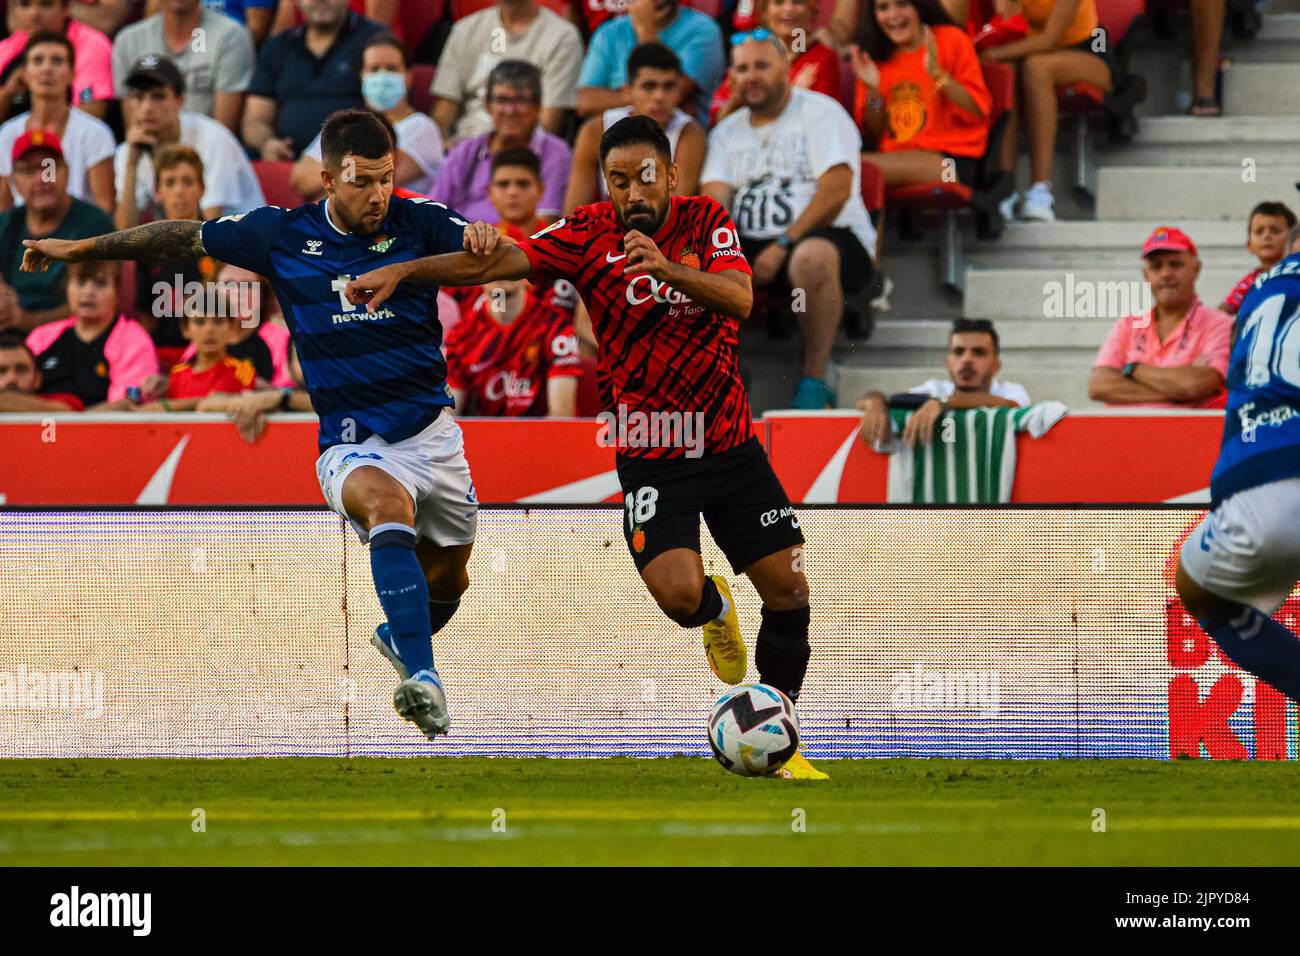 MALLORCA, SPAIN - AUGUST 20: Jaume Acosta of RCD Mallorca during in the match between RCD Mallorca and Real Betis of La Liga Santander on August 20, 2022 at Visit Mallorca Stadium Son Moix in Mallorca, Spain. (Photo by Samuel Carreño/PxImages) Stock Photo